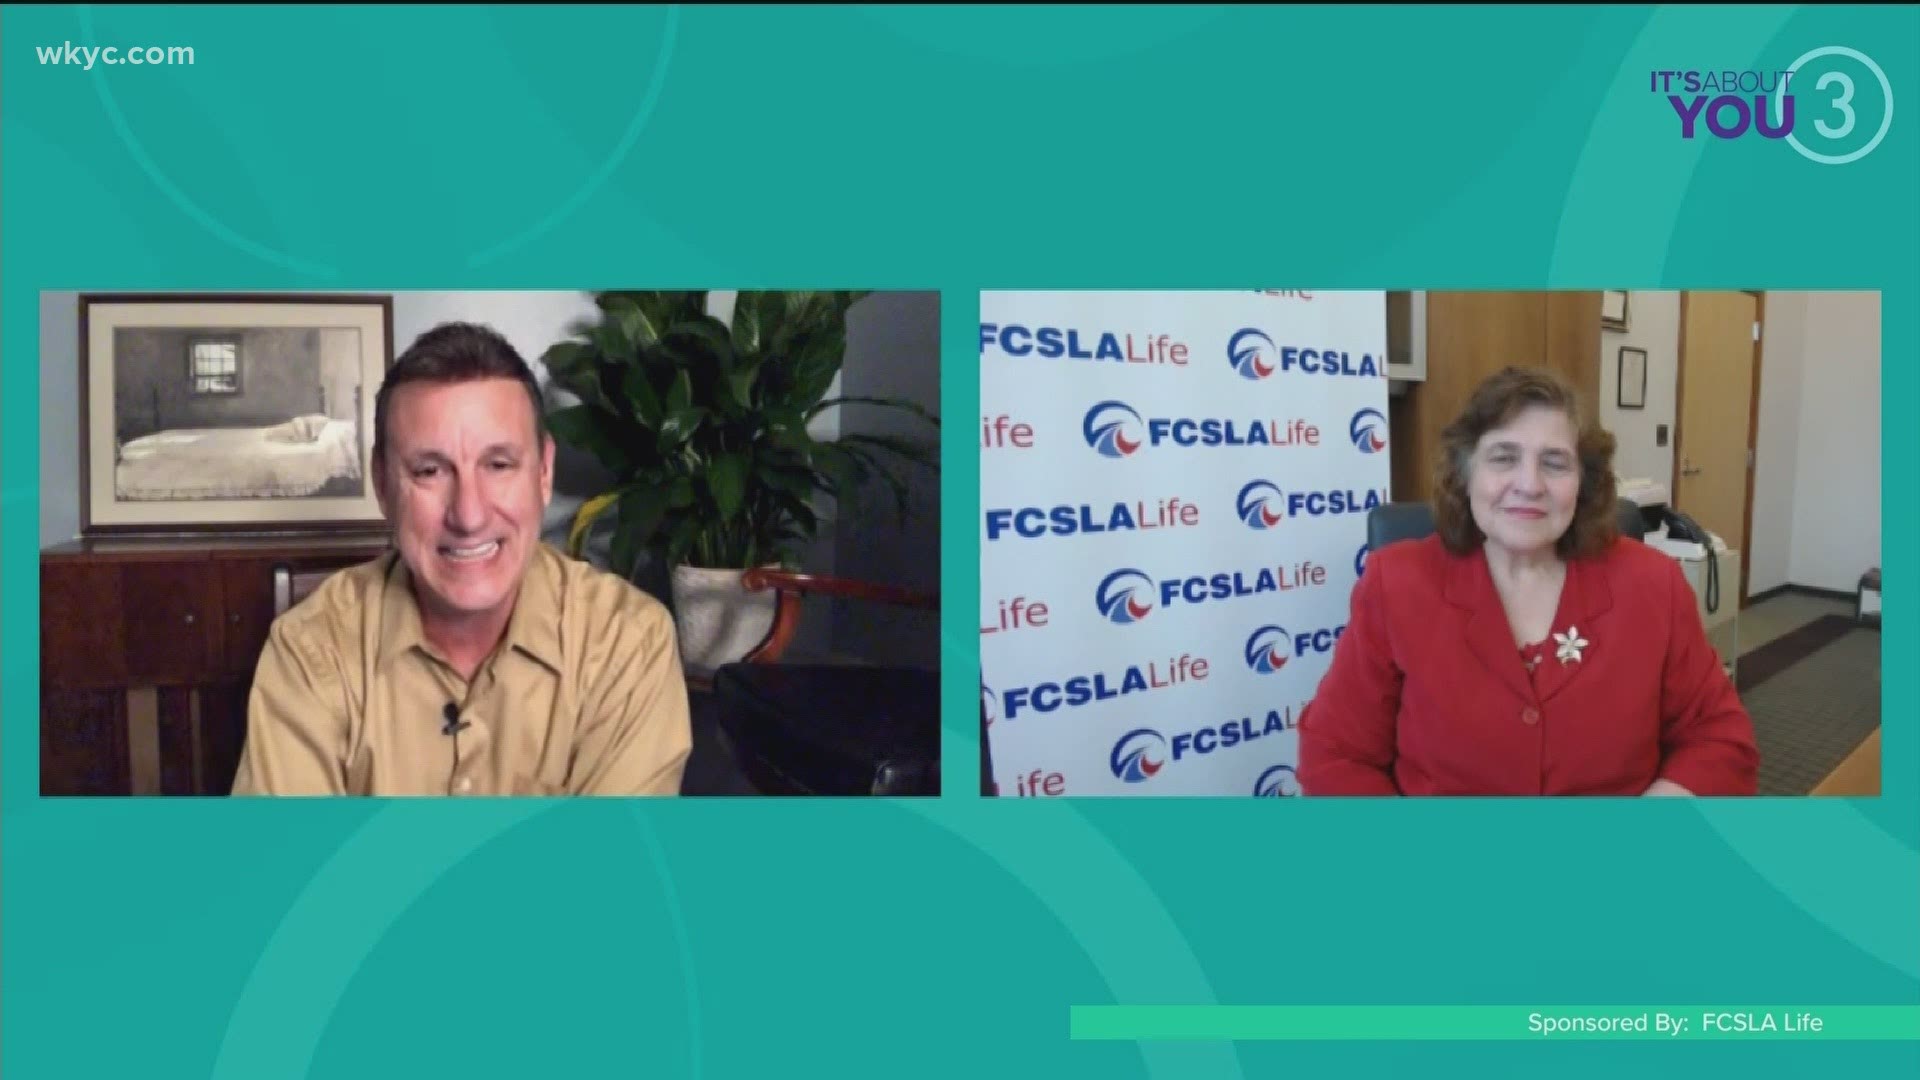 Joe is talking with FCSLA Life Presdient and CEO, Cynthia Maleski. FCSLA Life offers quality financial security along with community outreach.